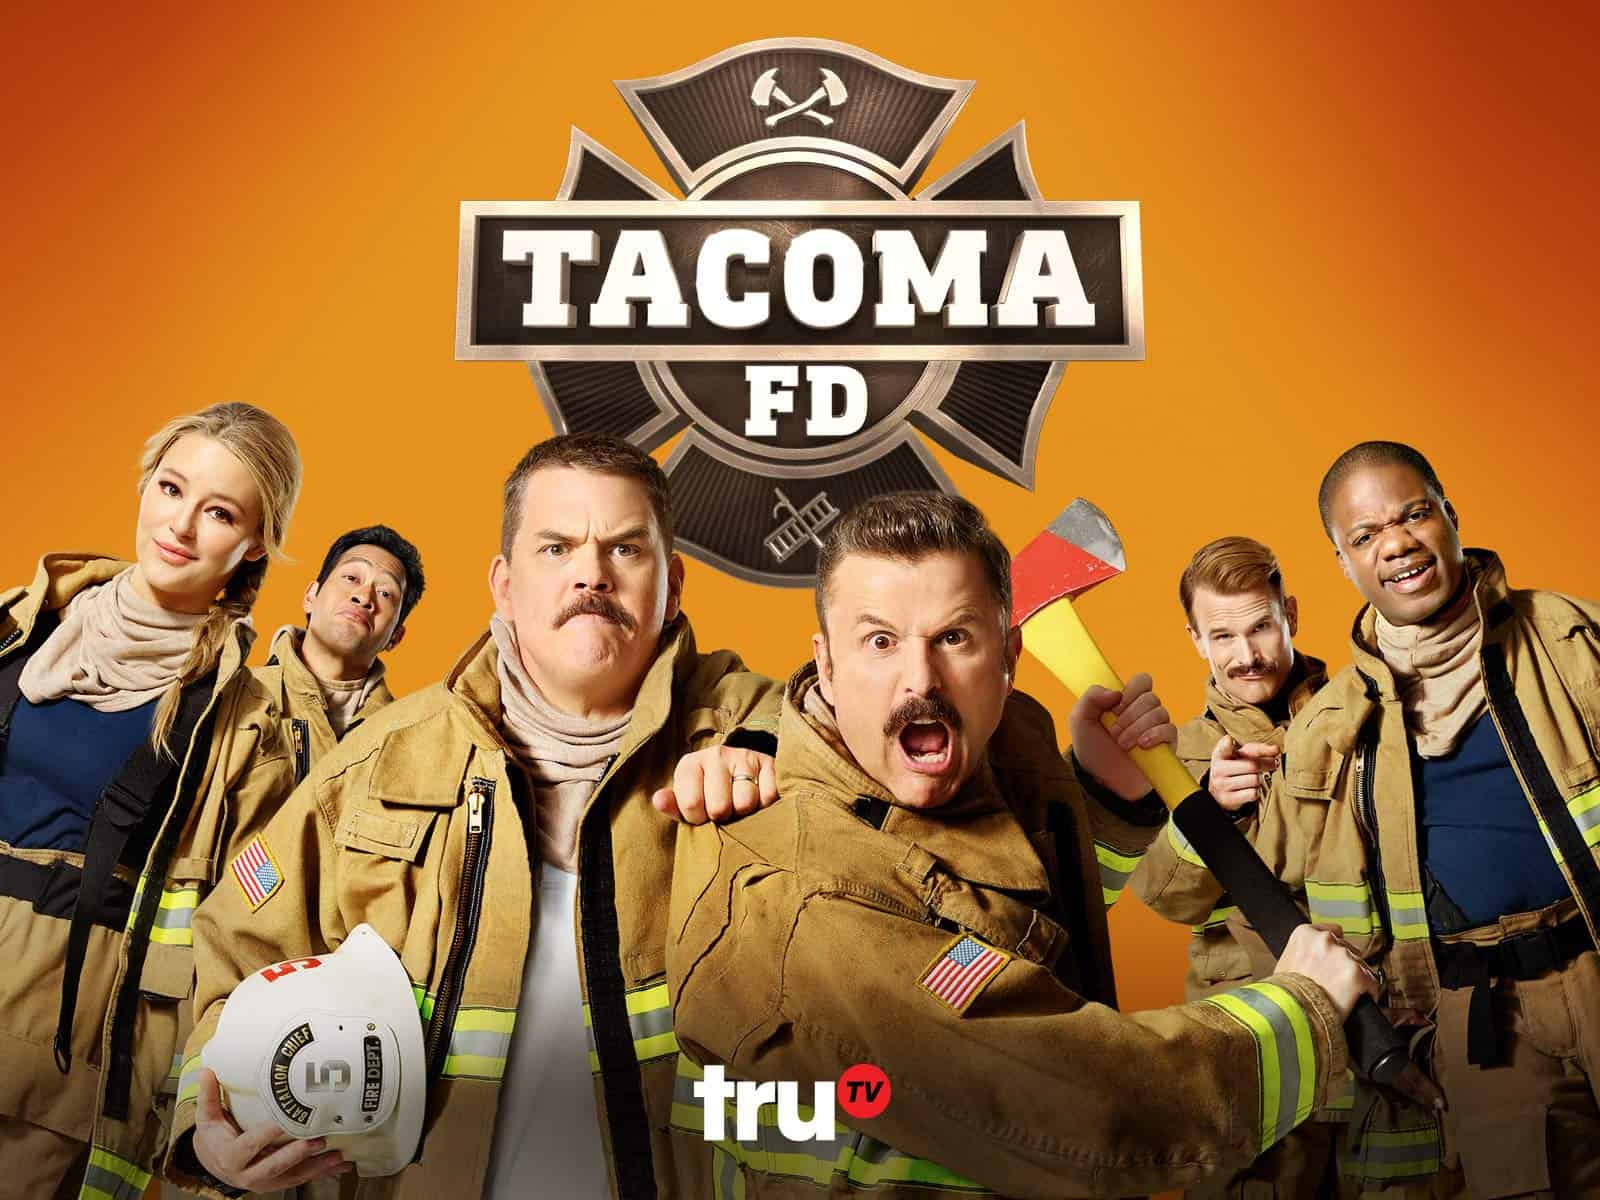 All About the Latest Season of “Tacoma FD”